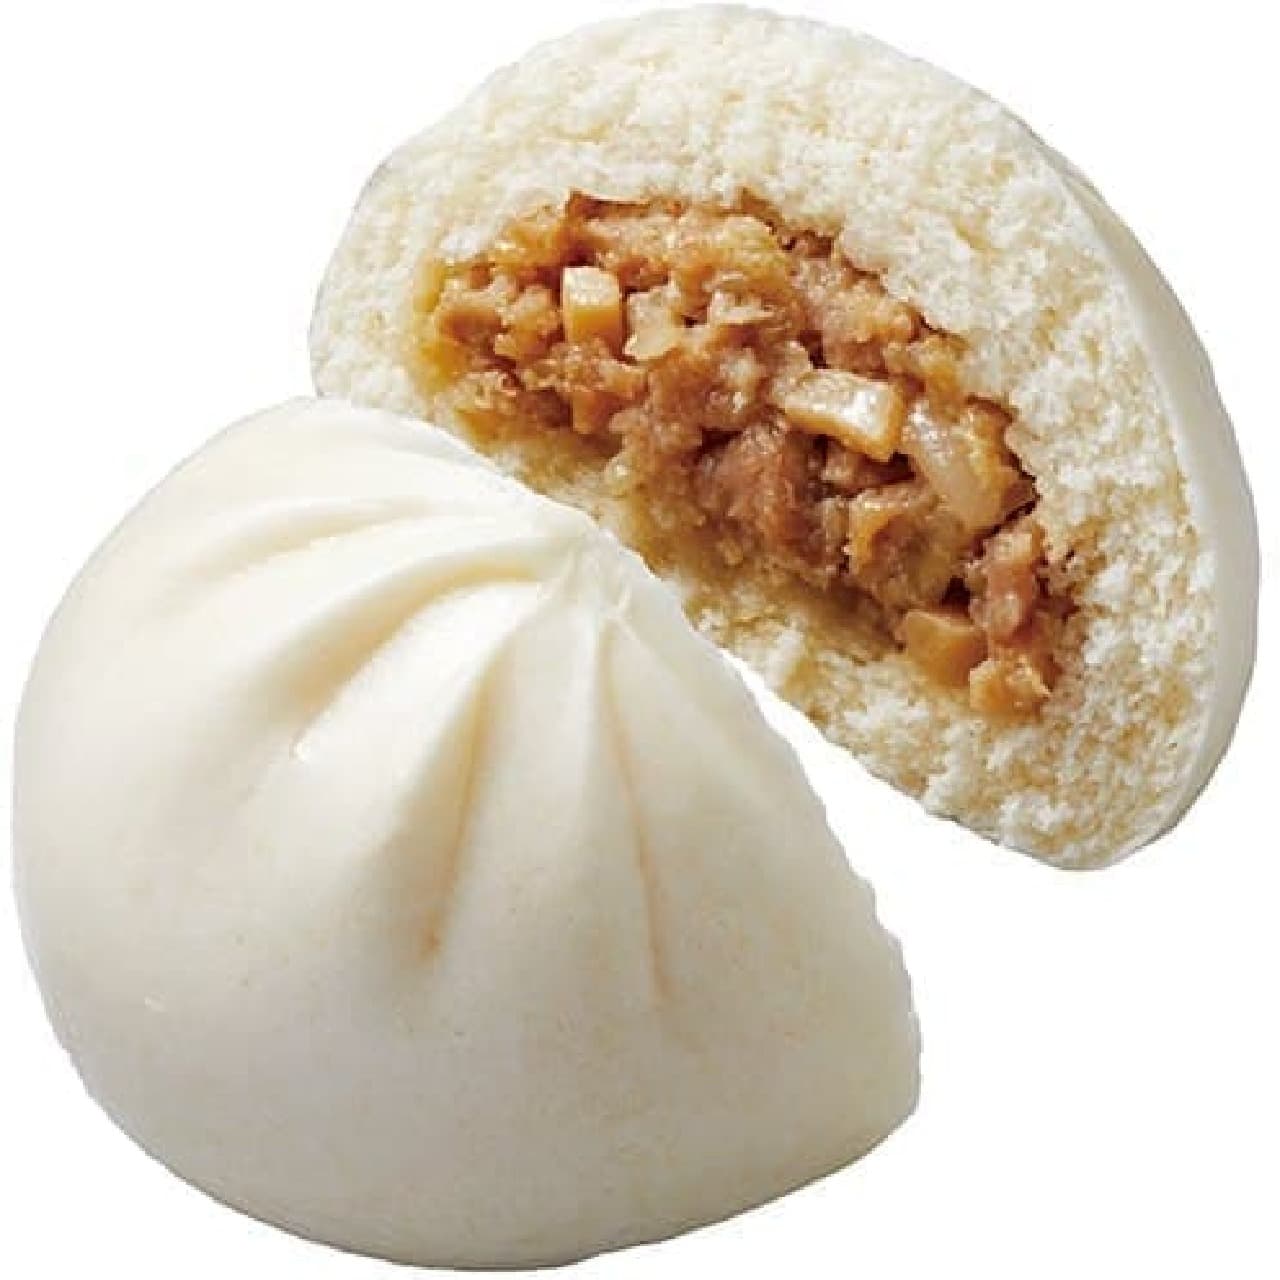 Lawson 2018 version of "Chinese steamed bun"